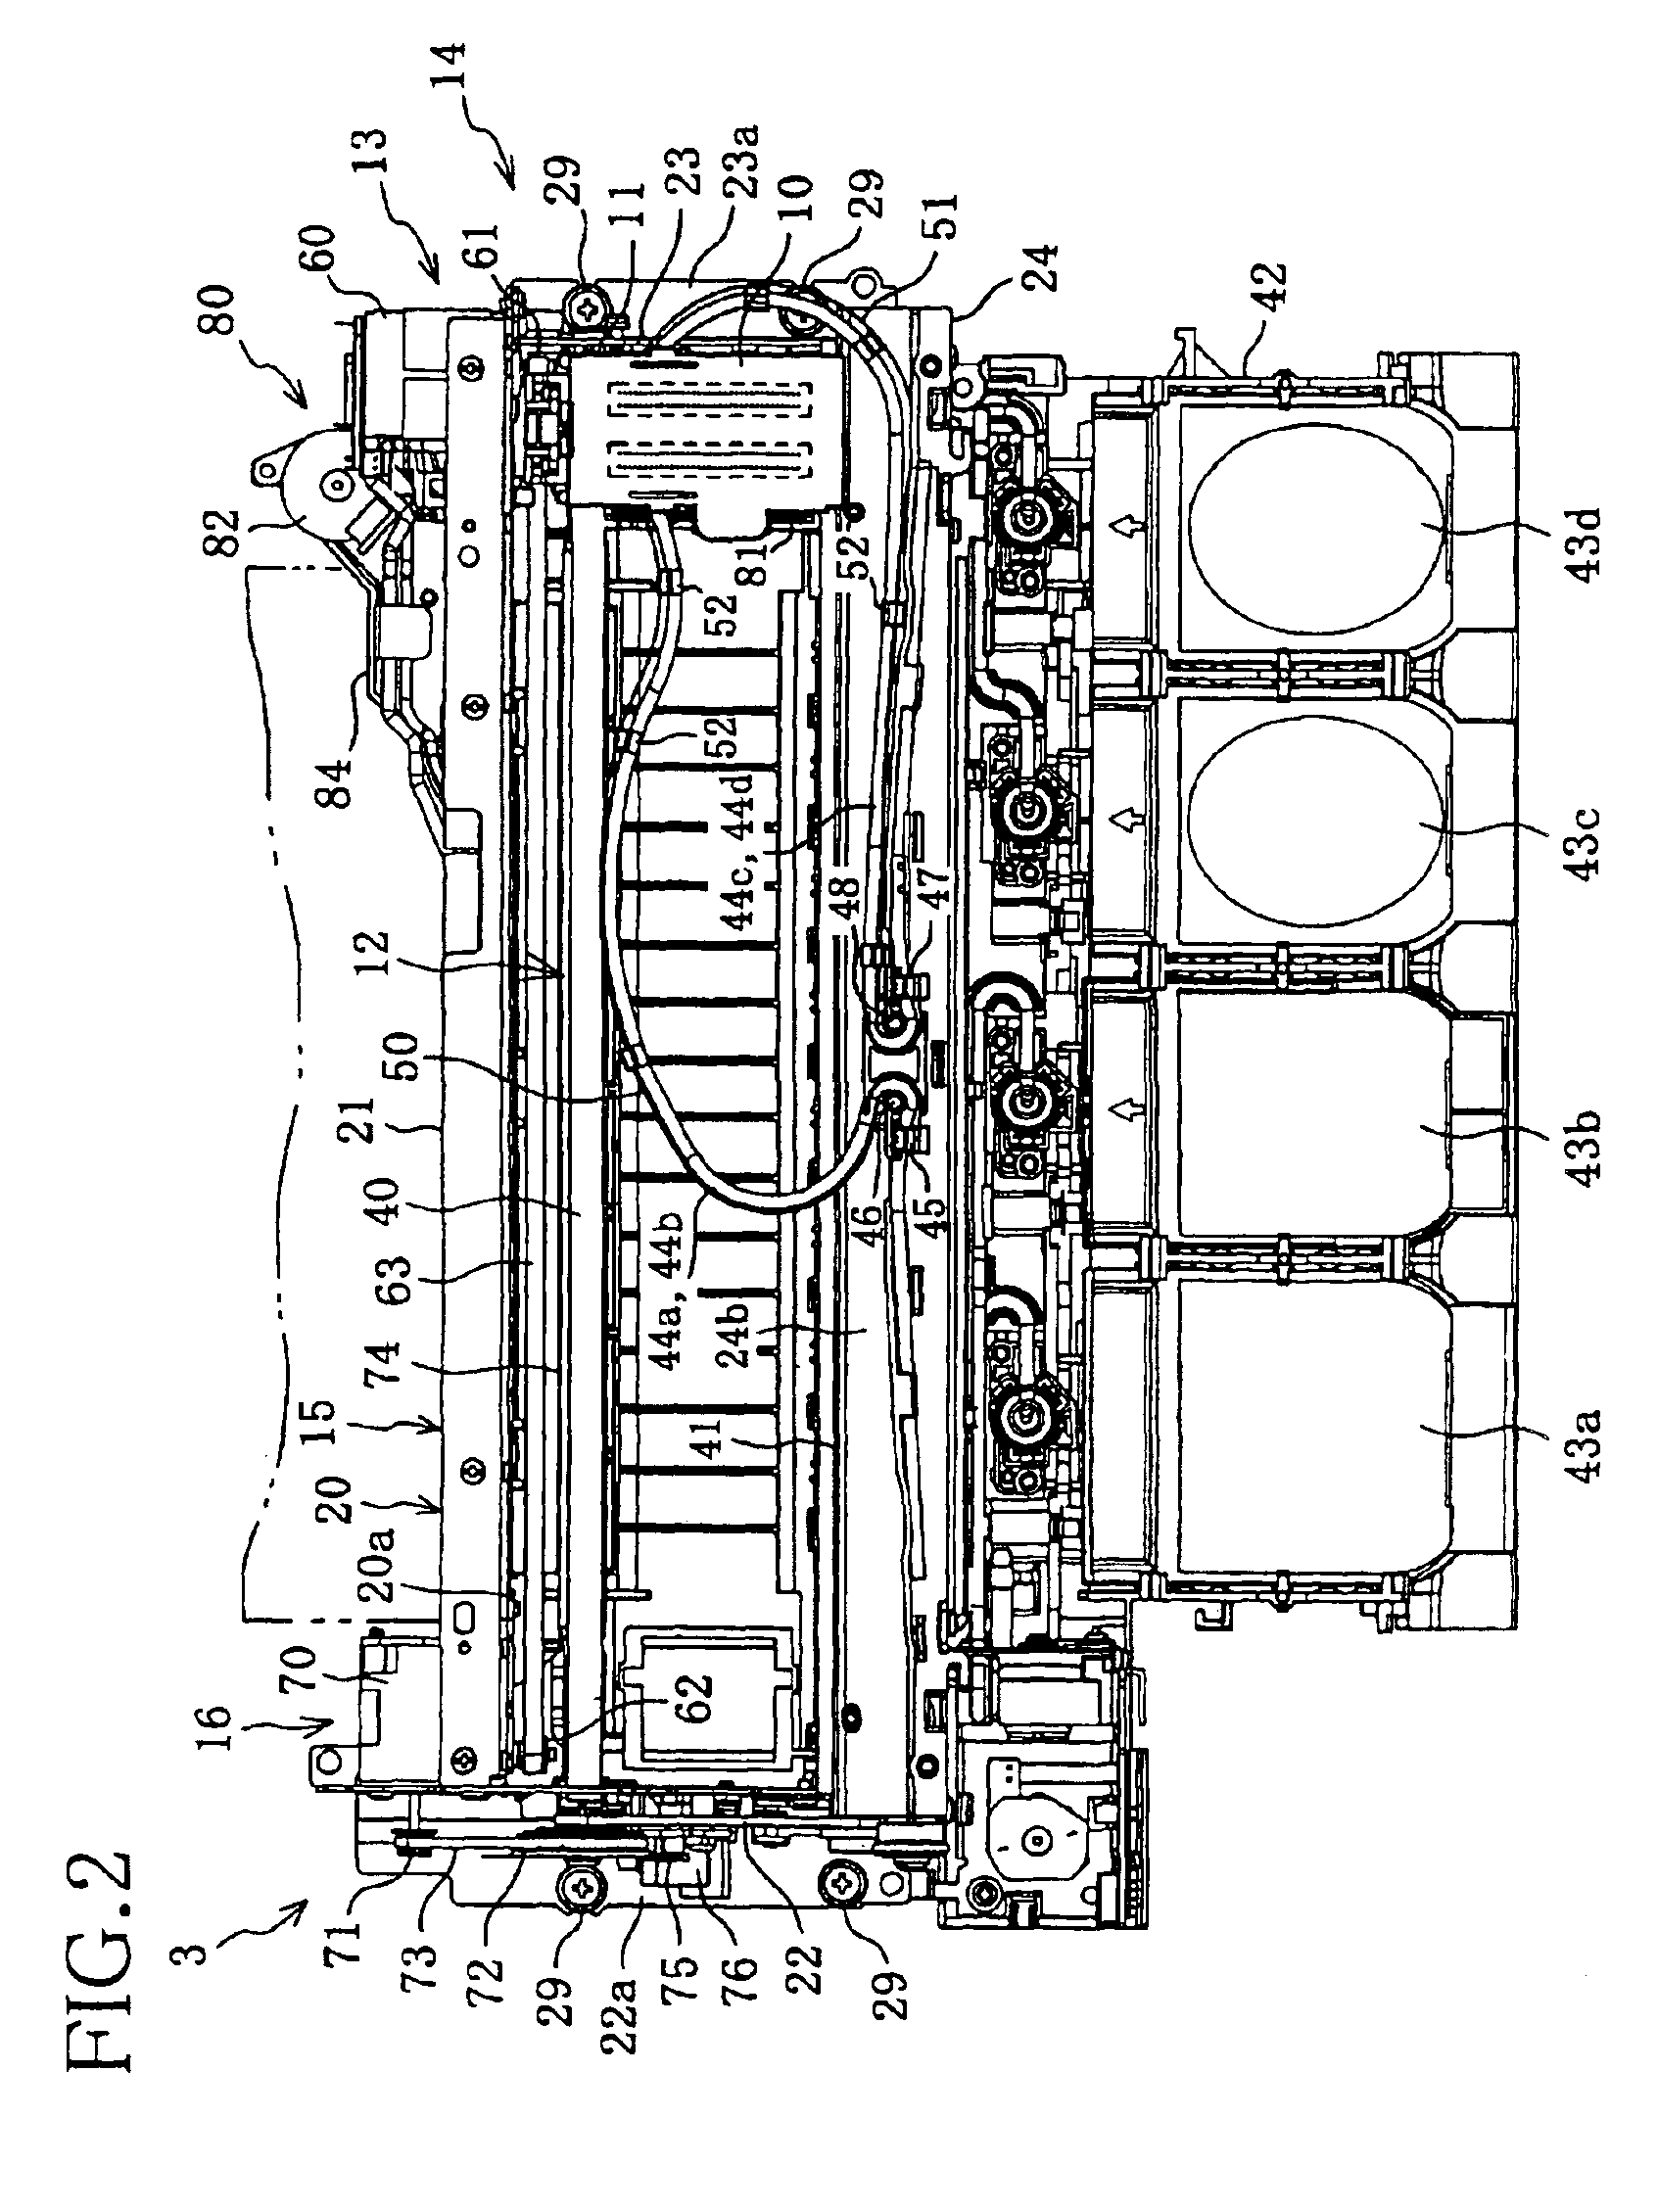 Printer with reinforcing cover and ink tube fixing portions